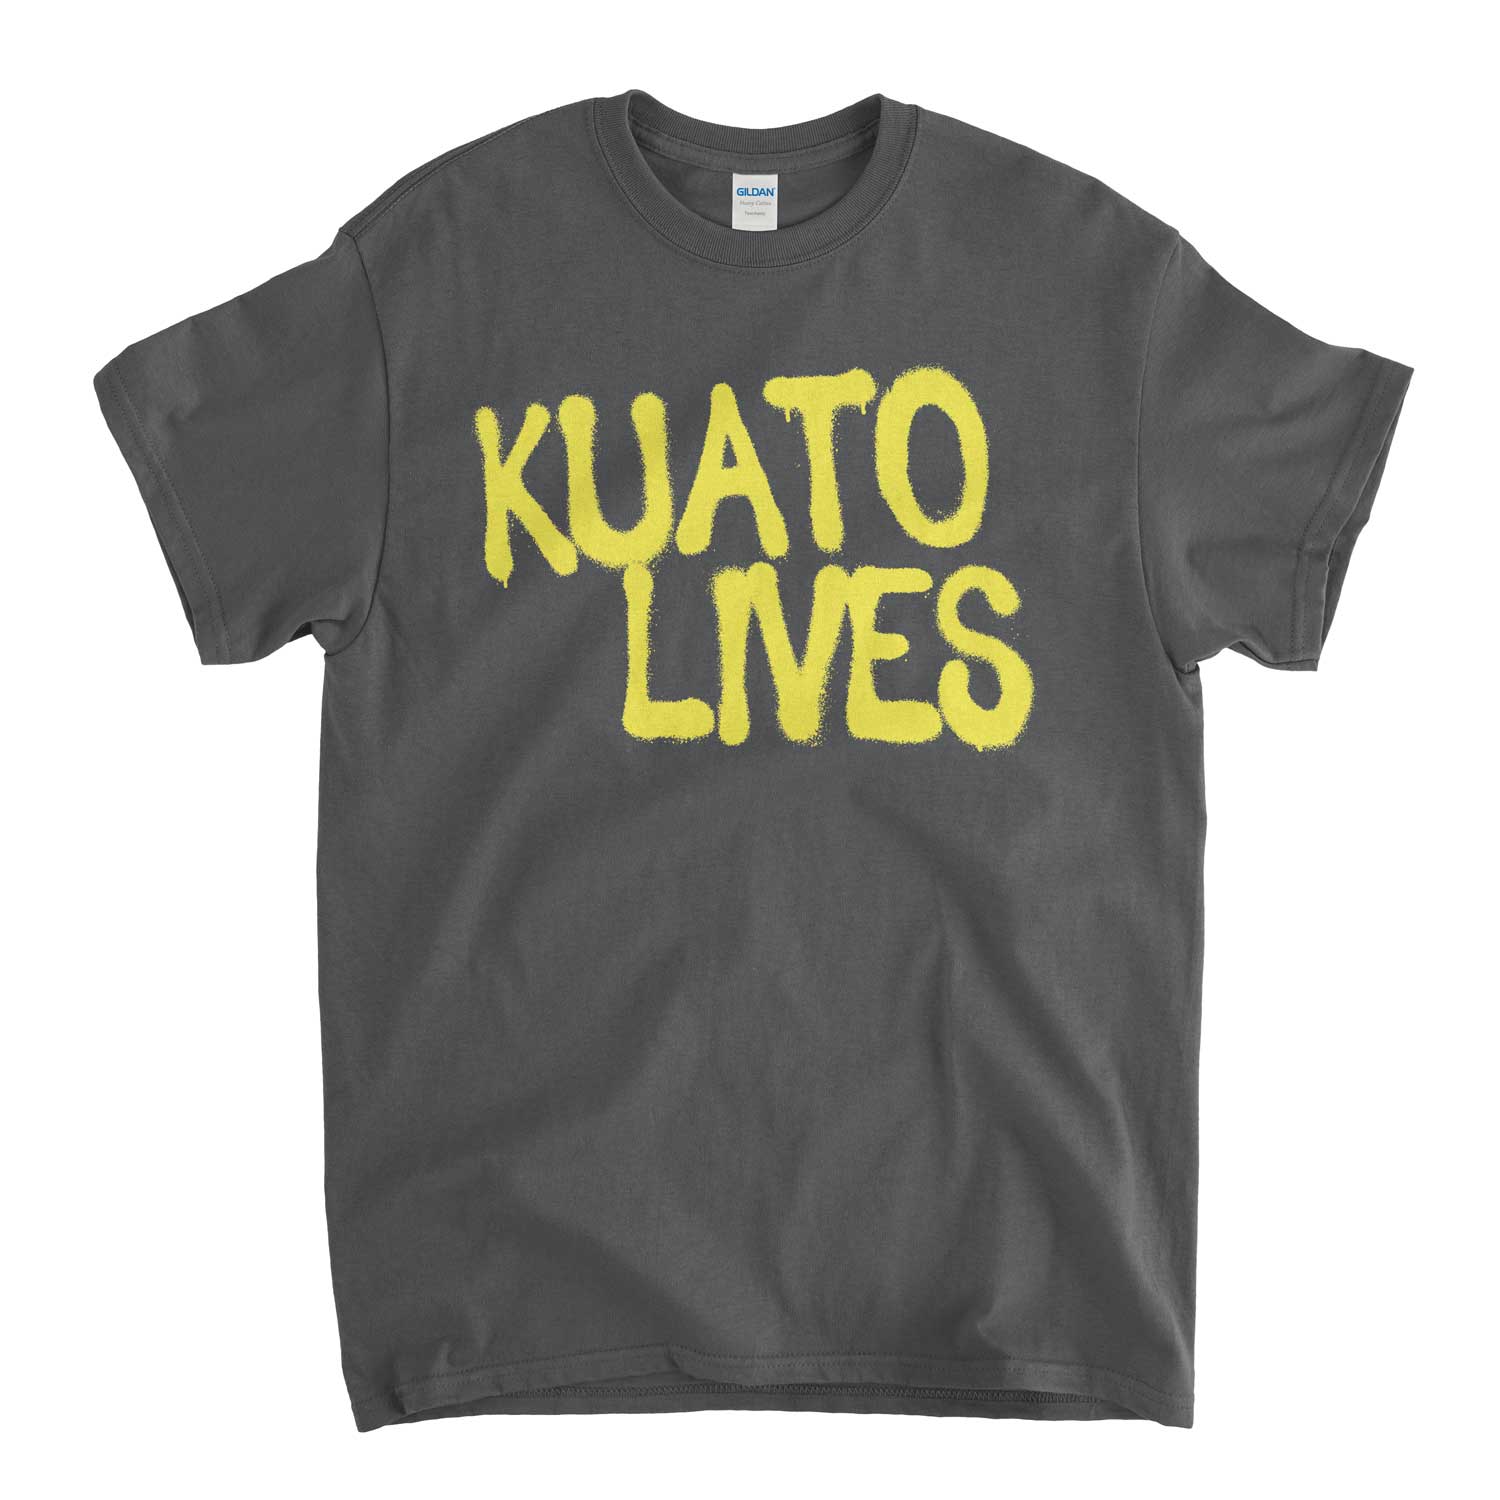 Kuato Lives Inspired By Total Recall T Shirt Cult Film